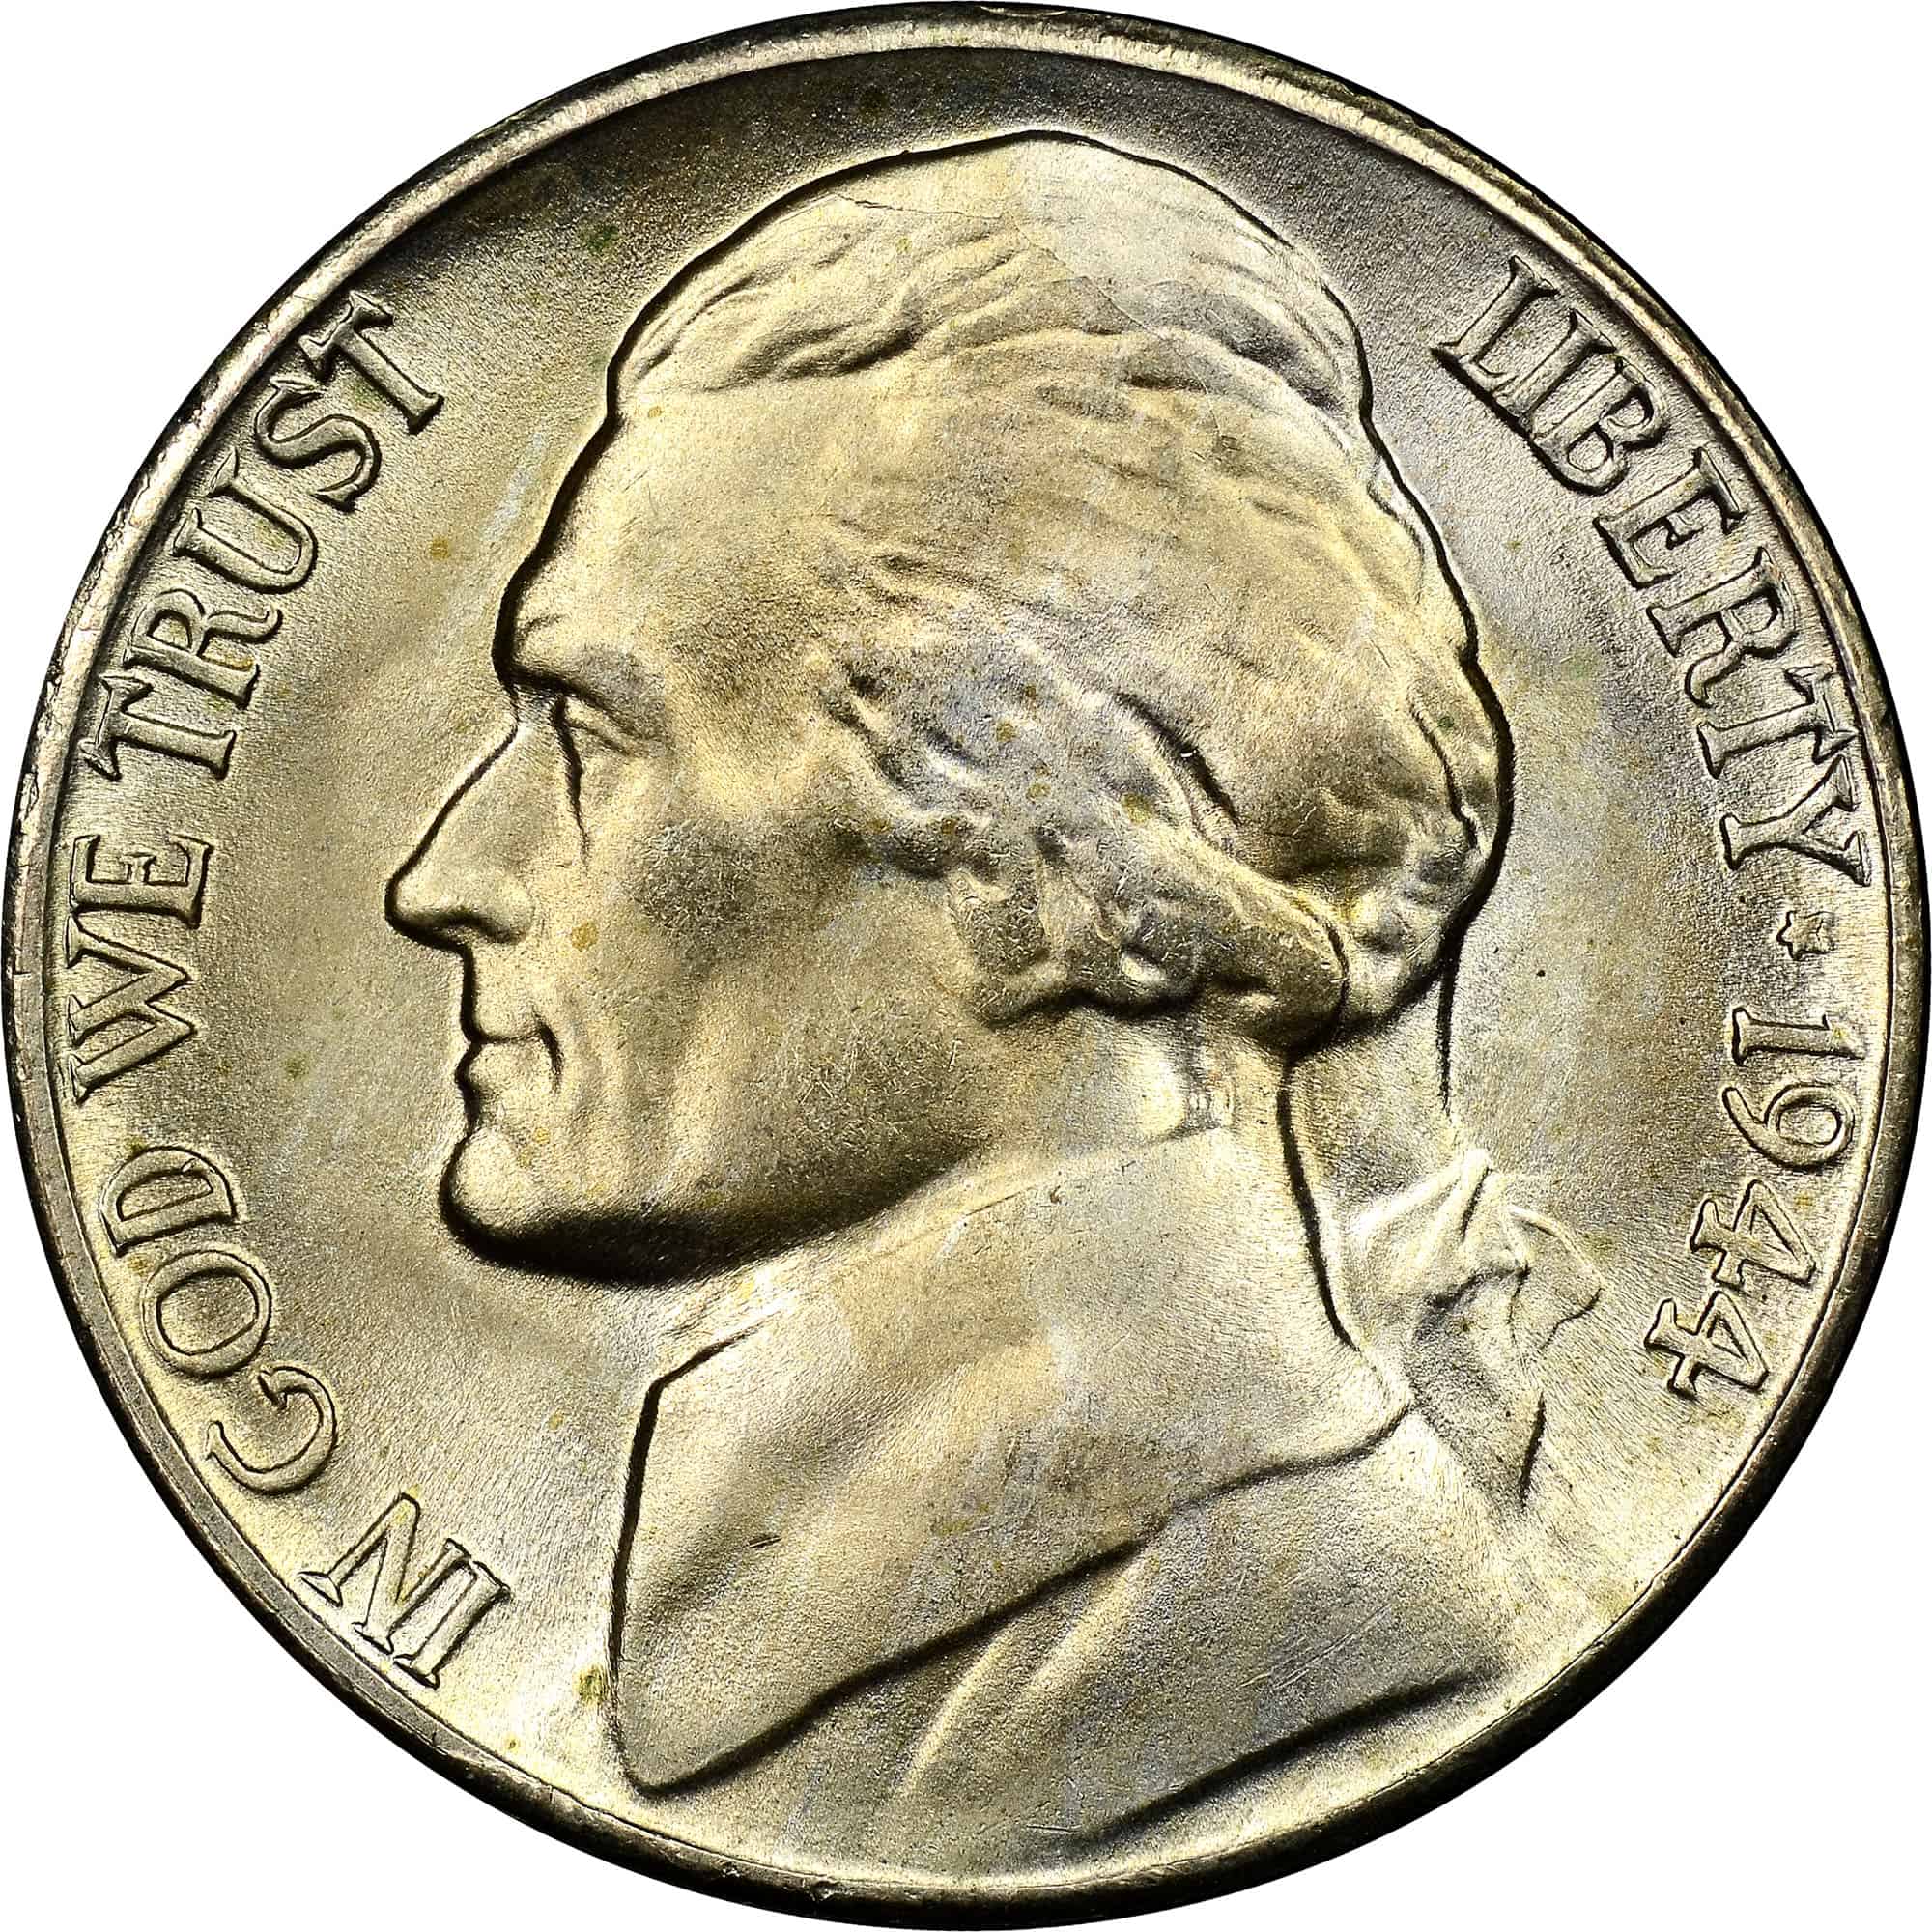 The Obverse of the 1942 Nickel